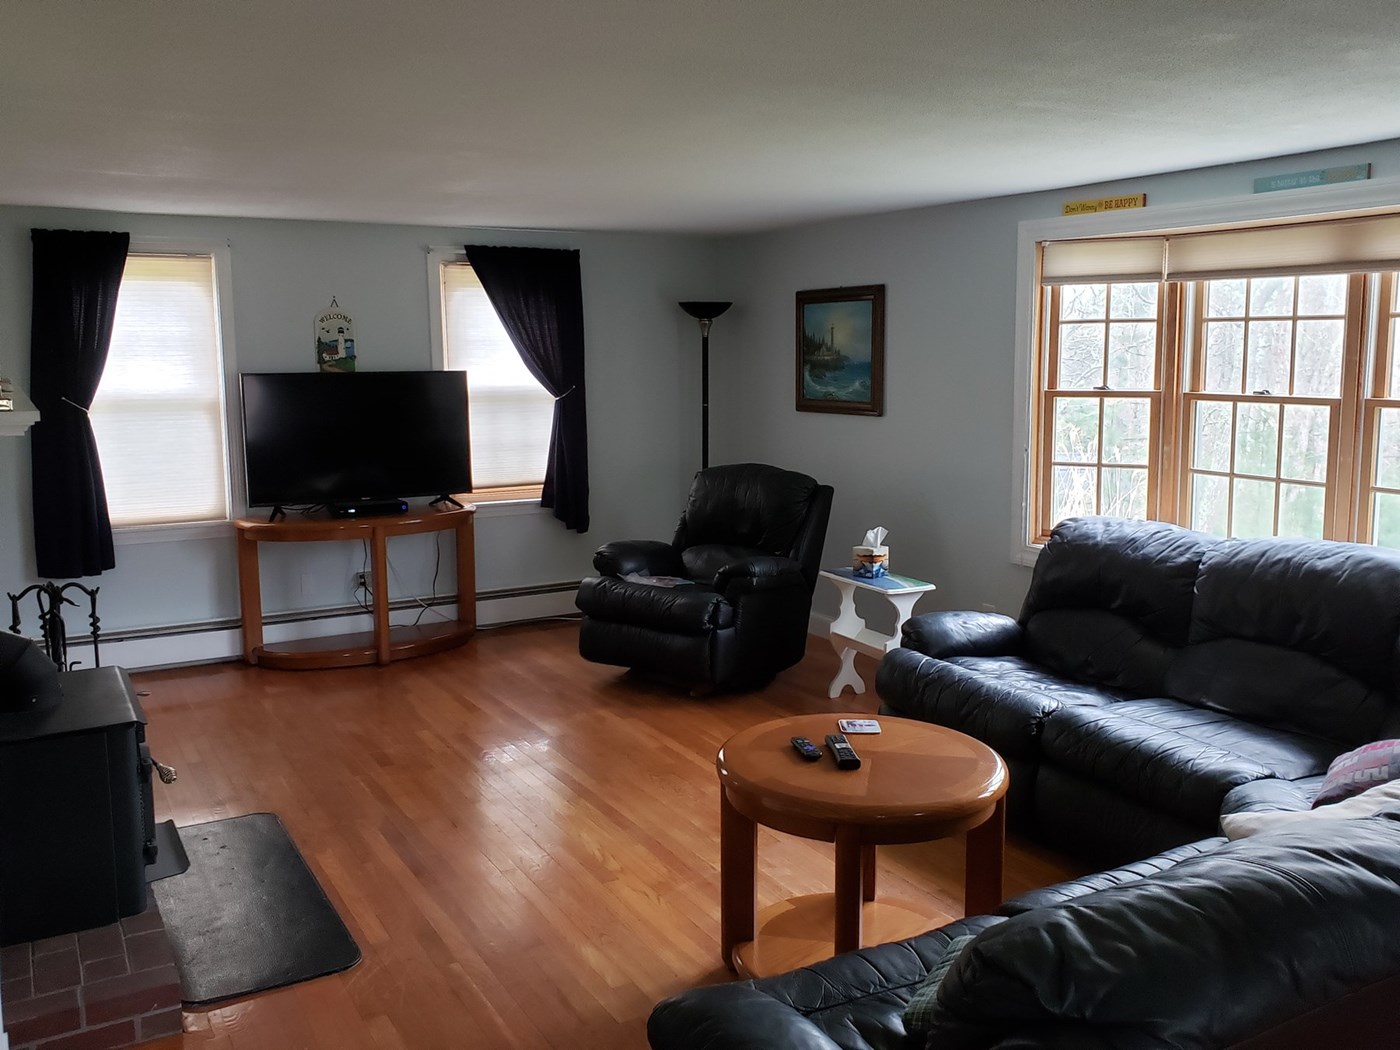 Falmouth Vacation Rental Home In Cape Cod Ma 6 10 Of A Mile To